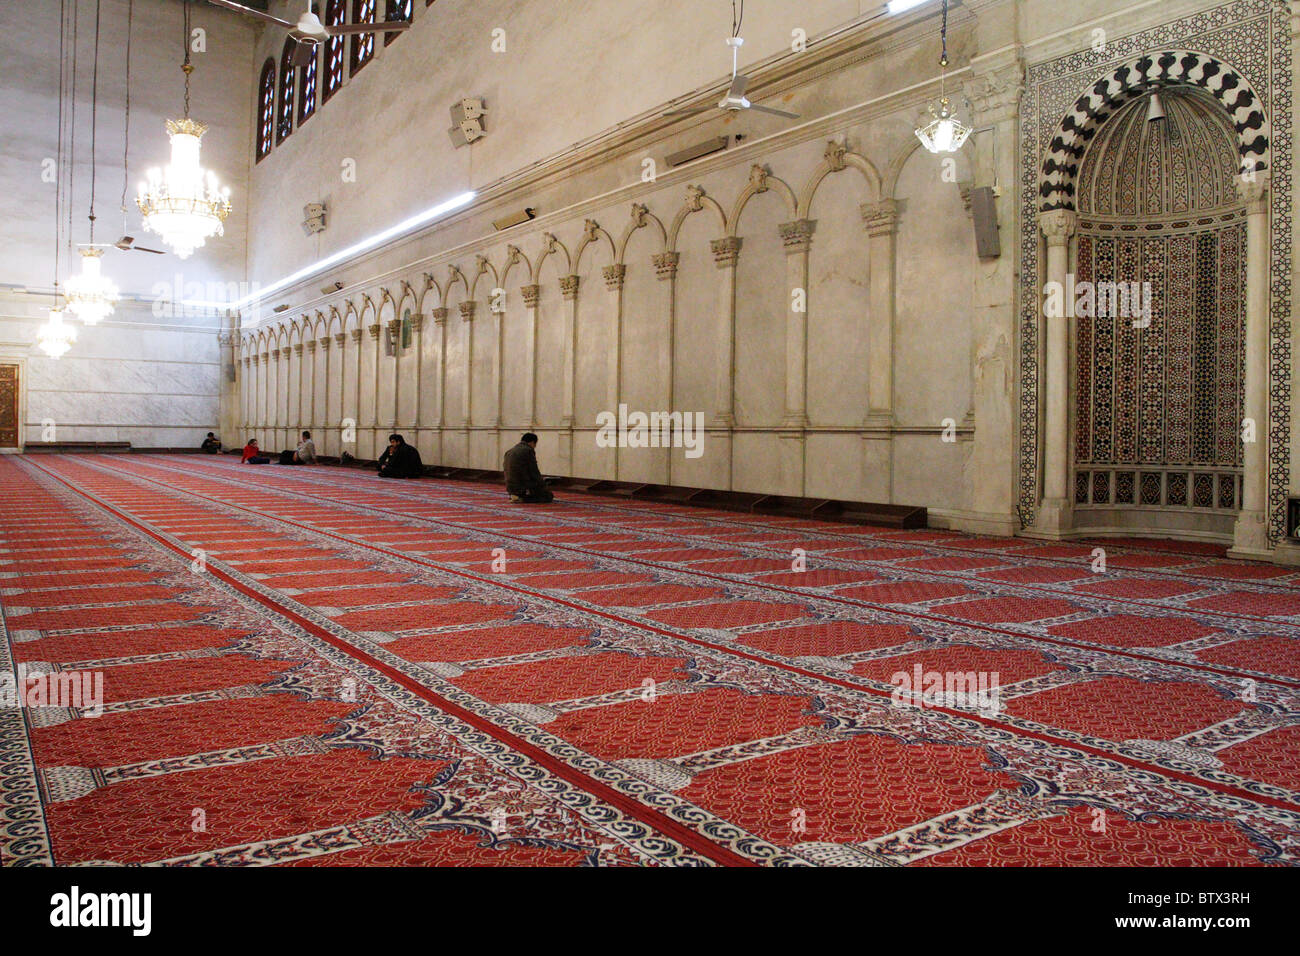 Mihrab and praying hall inside Umayyad mosque in Damascus, Syria. Stock Photo